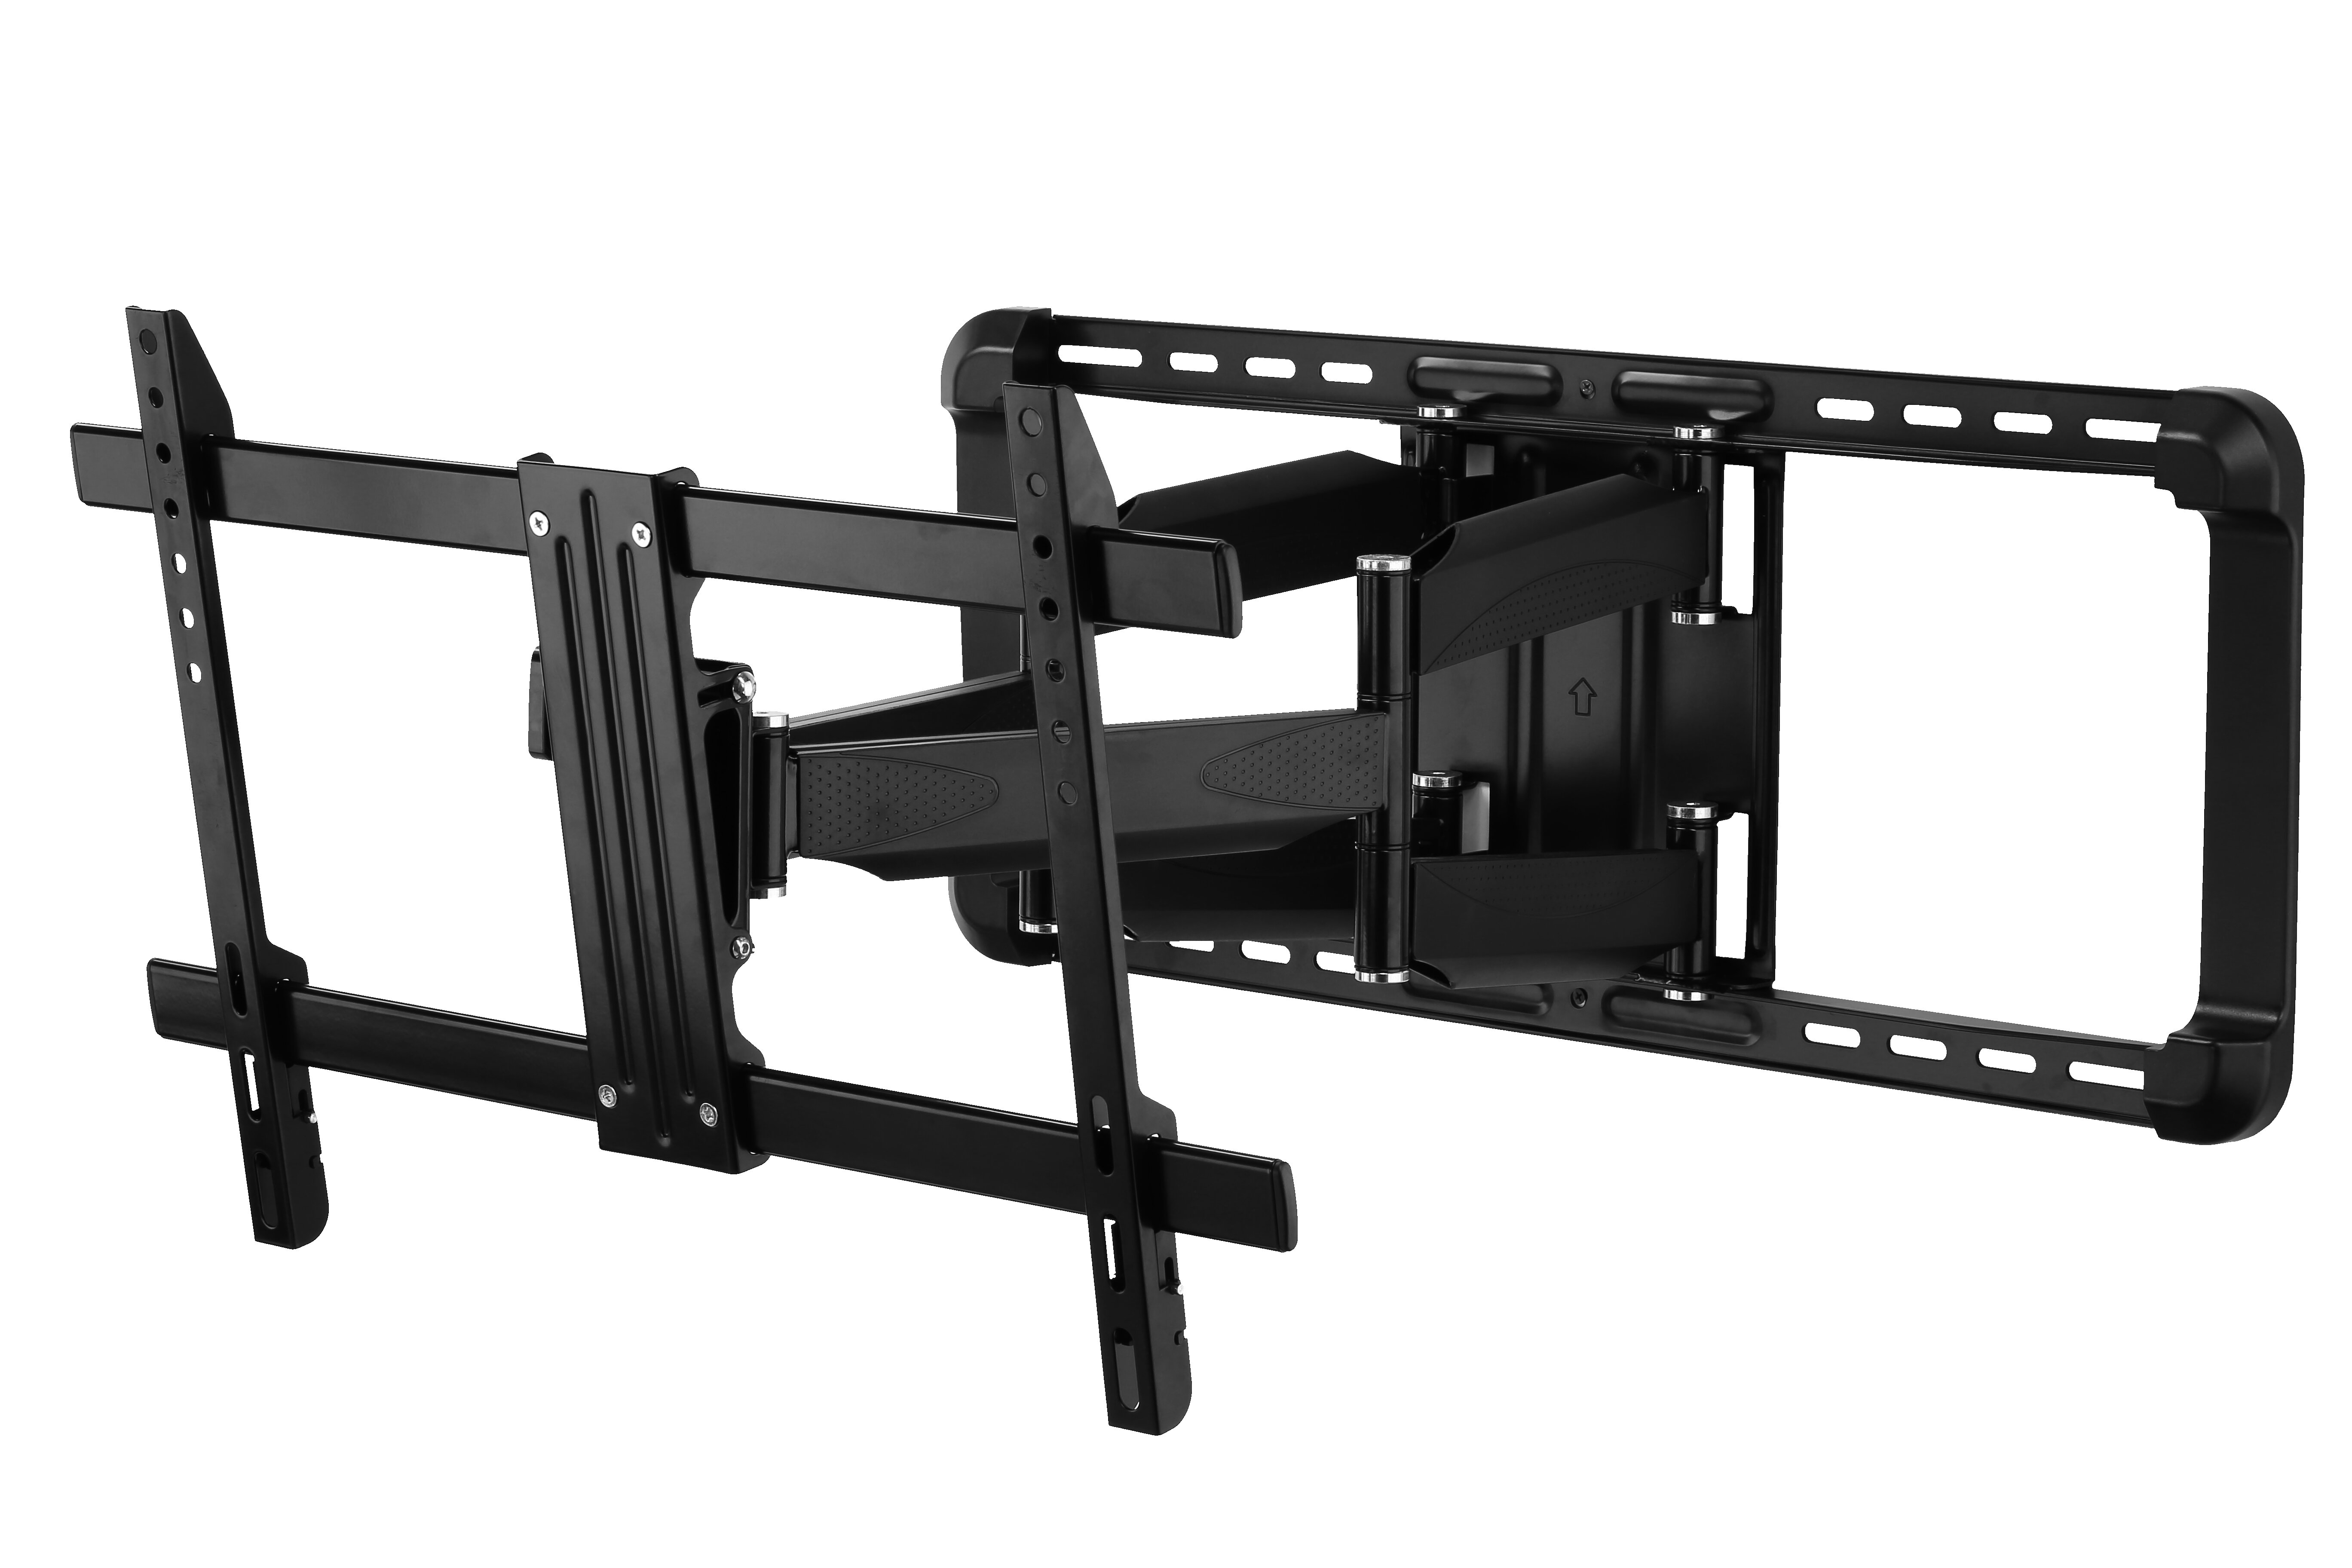 Mount-It! Low-Profile Large TV Mount | Flush TV Wall Mount | Ultra-Slim  Fixed TV Mount for 42-70 in. Screen TVs | VESA Compatibility up to 800x400  